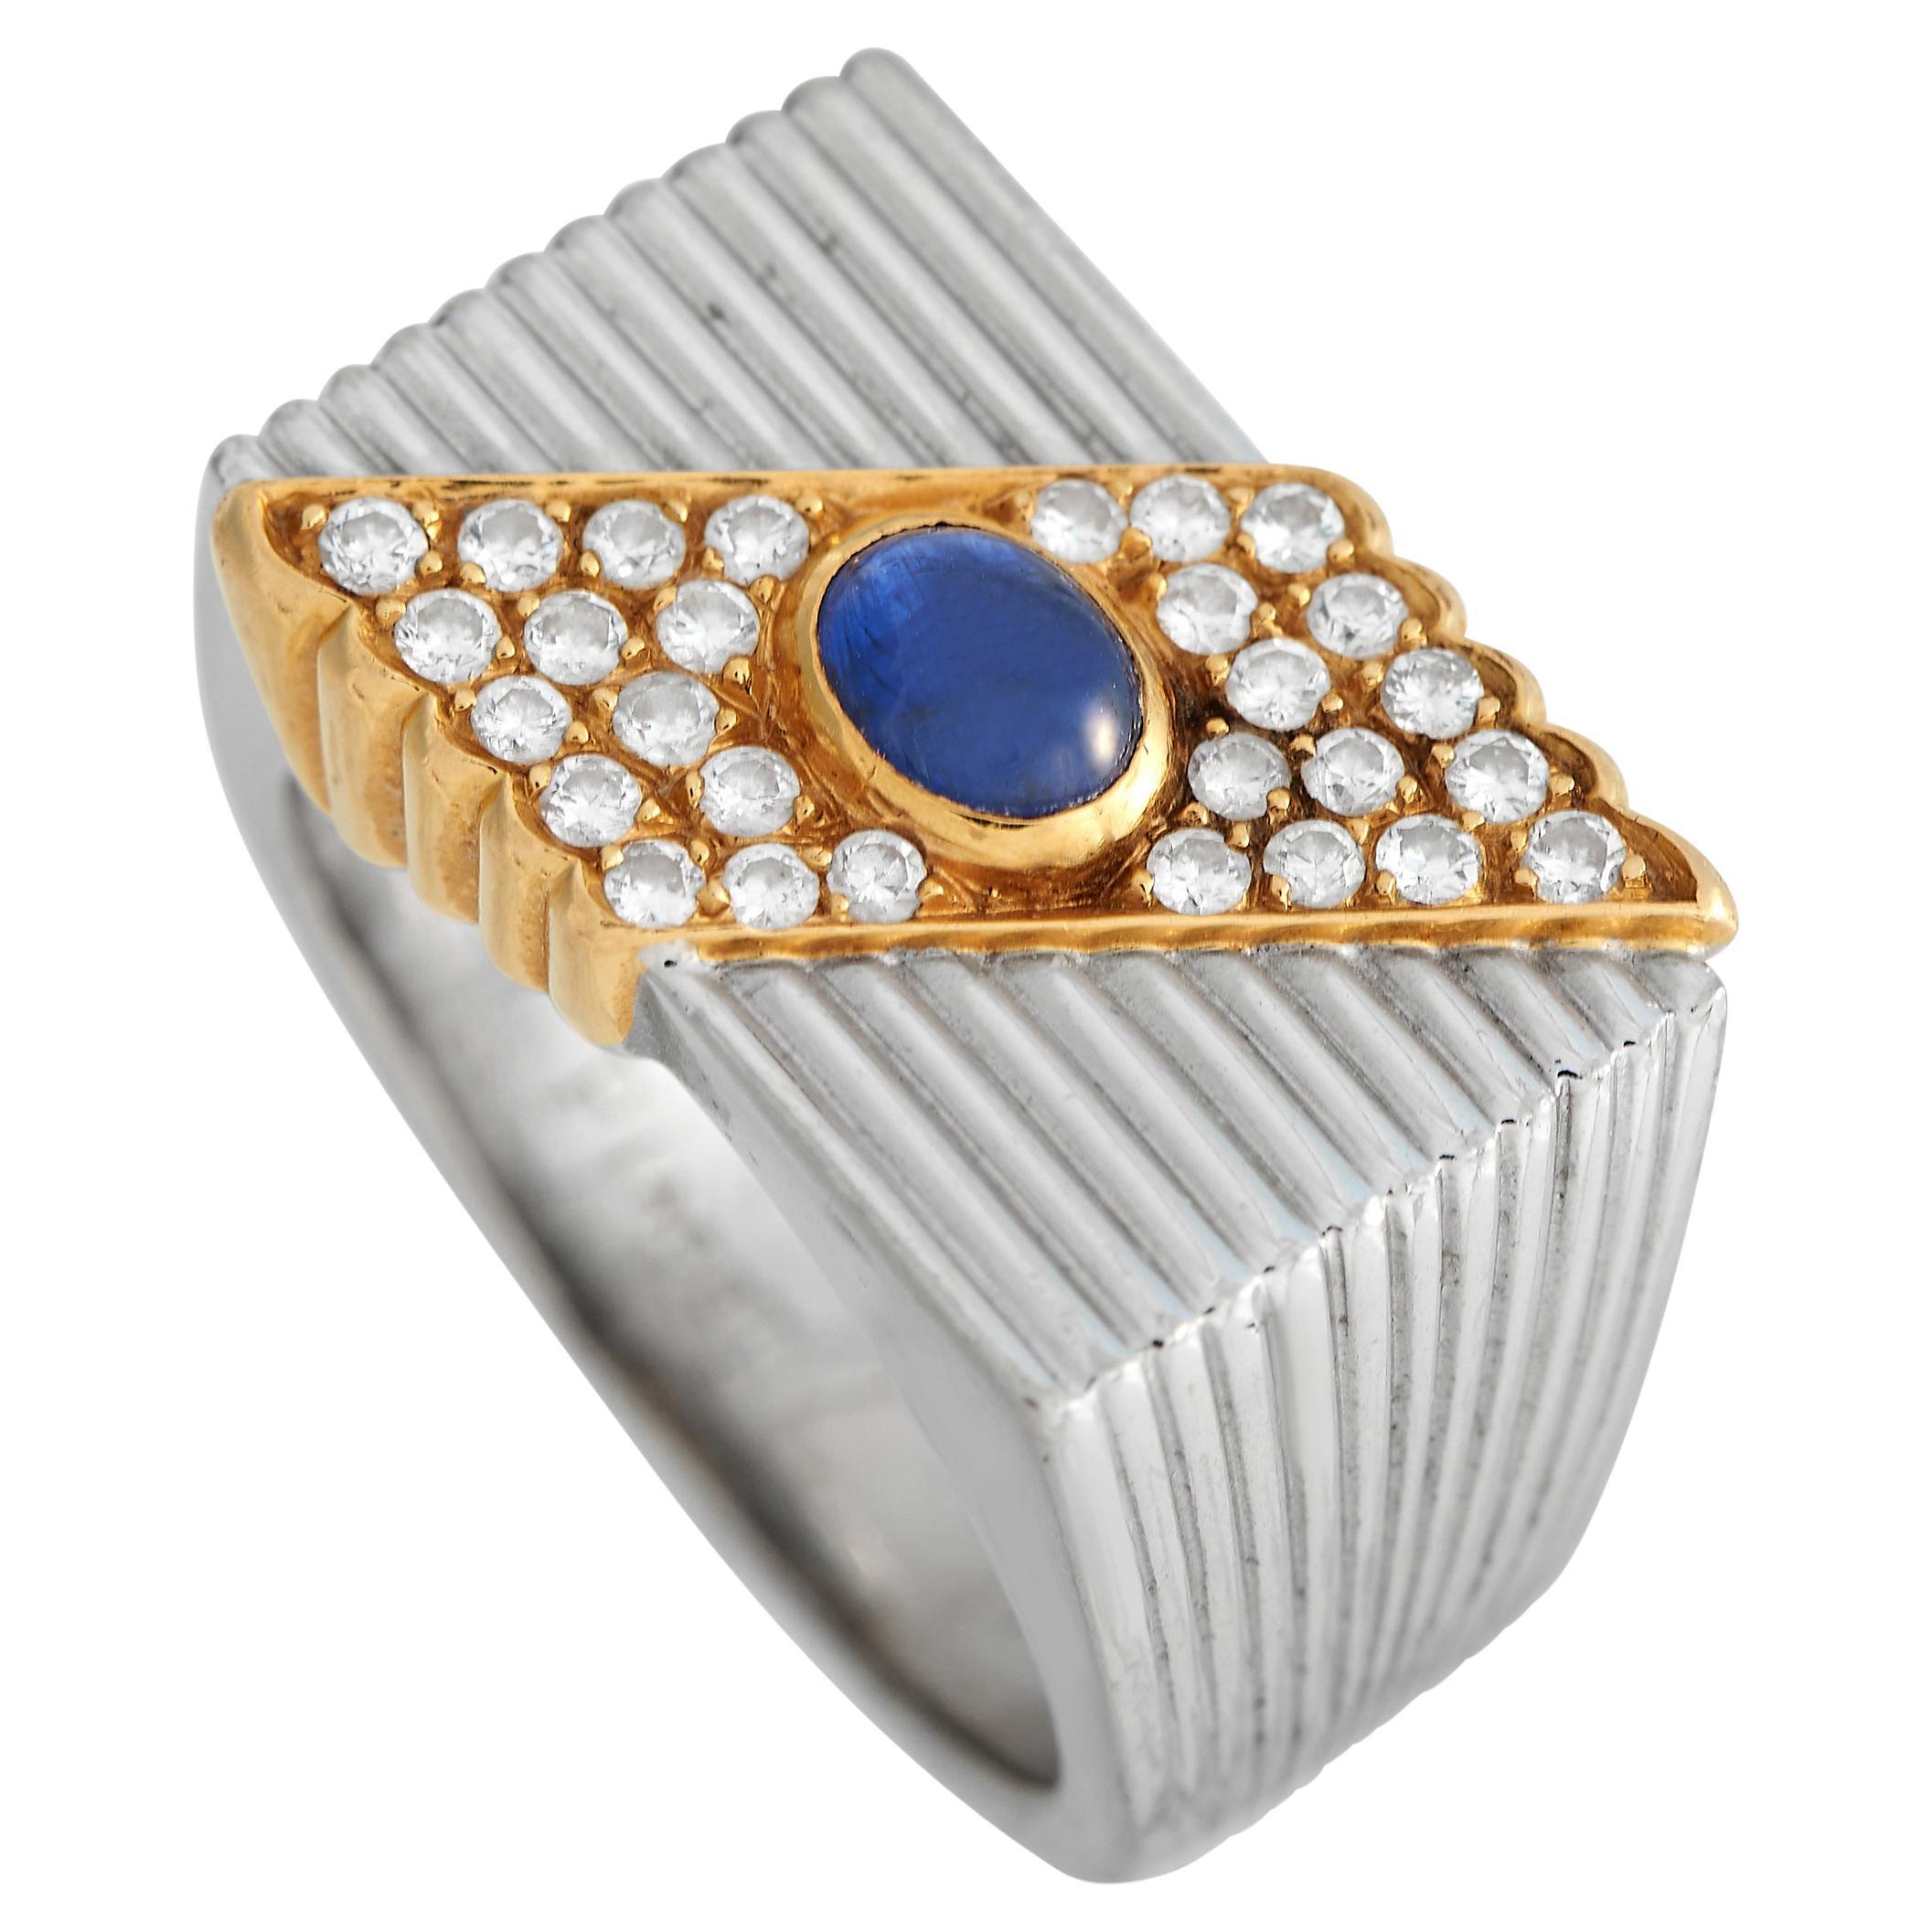 Piaget 18K White and Yellow Gold Diamond and Sapphire Fluted Square Ring